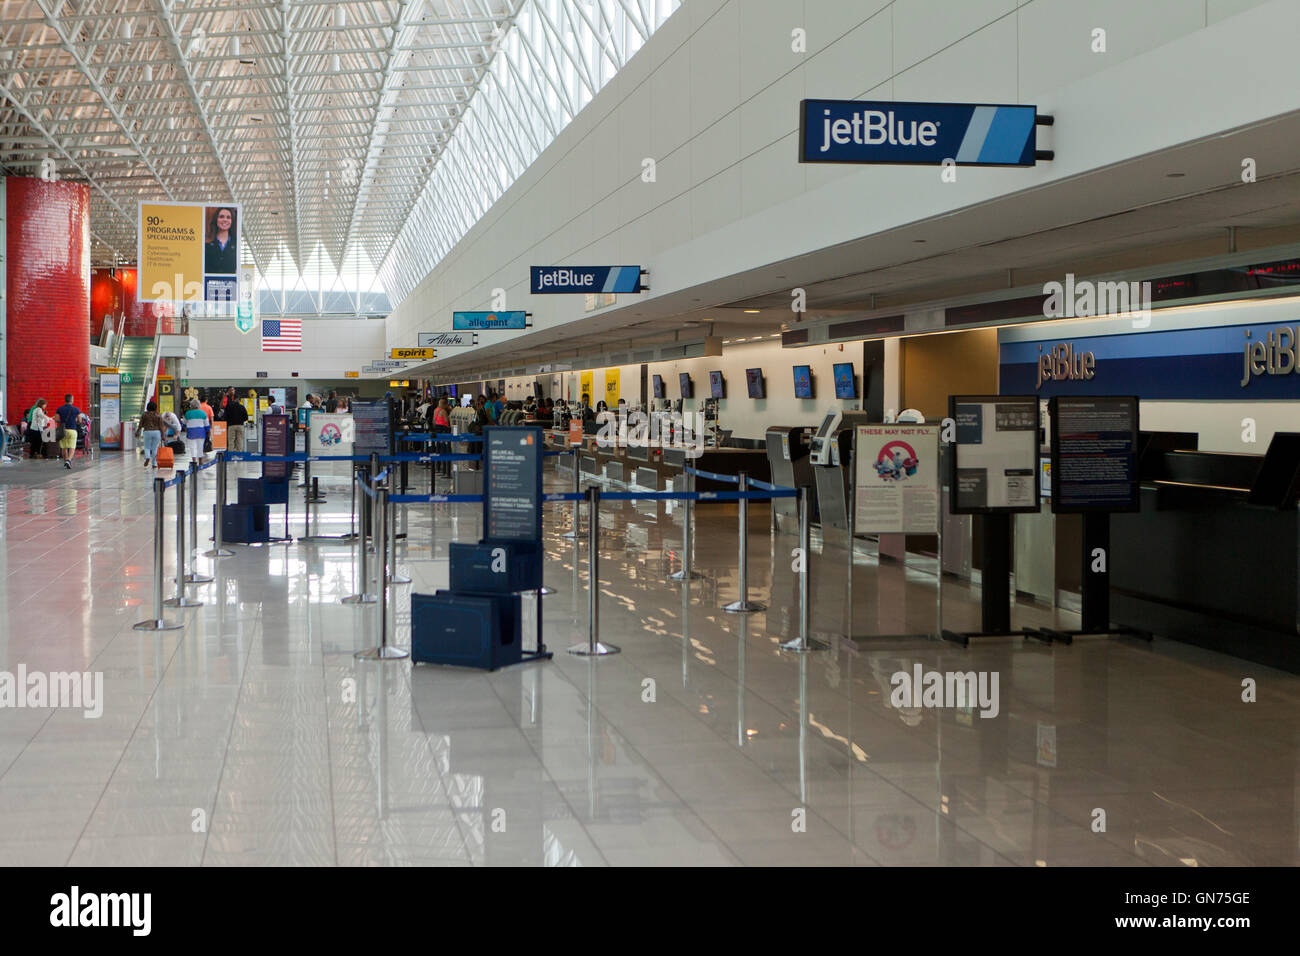 JetBlue Airlines ticket counter at BWI International airport - USA Stock Photo